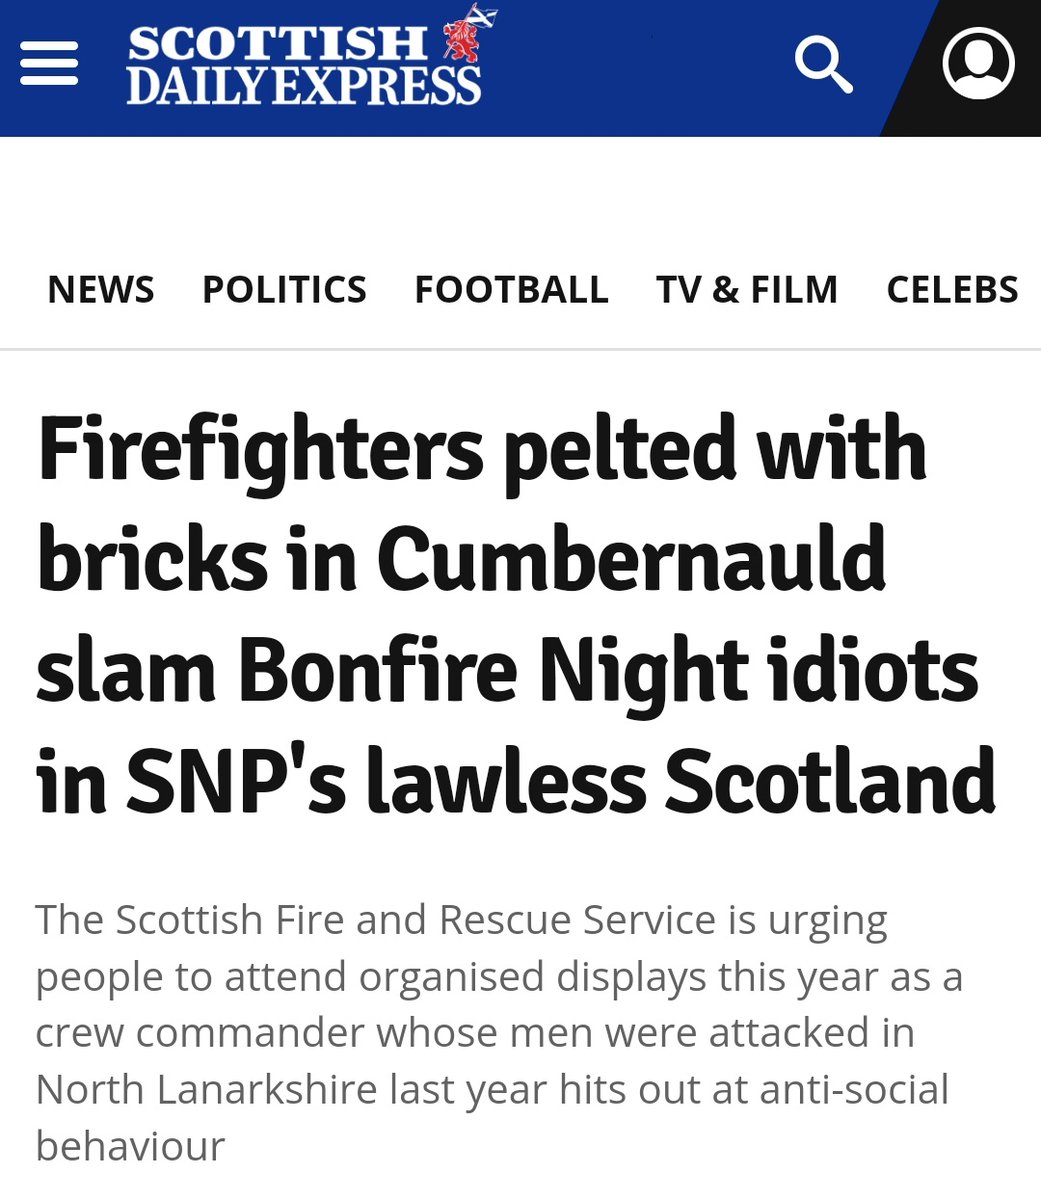 Trust the @ScotExpress to blame the SNP for yobs throwing bricks at firefighters. I'm surprised @chorleycake2 hasn't blamed the SNP for the economic collapse at the hands of the UK Government. The Express is where journalism goes to die.